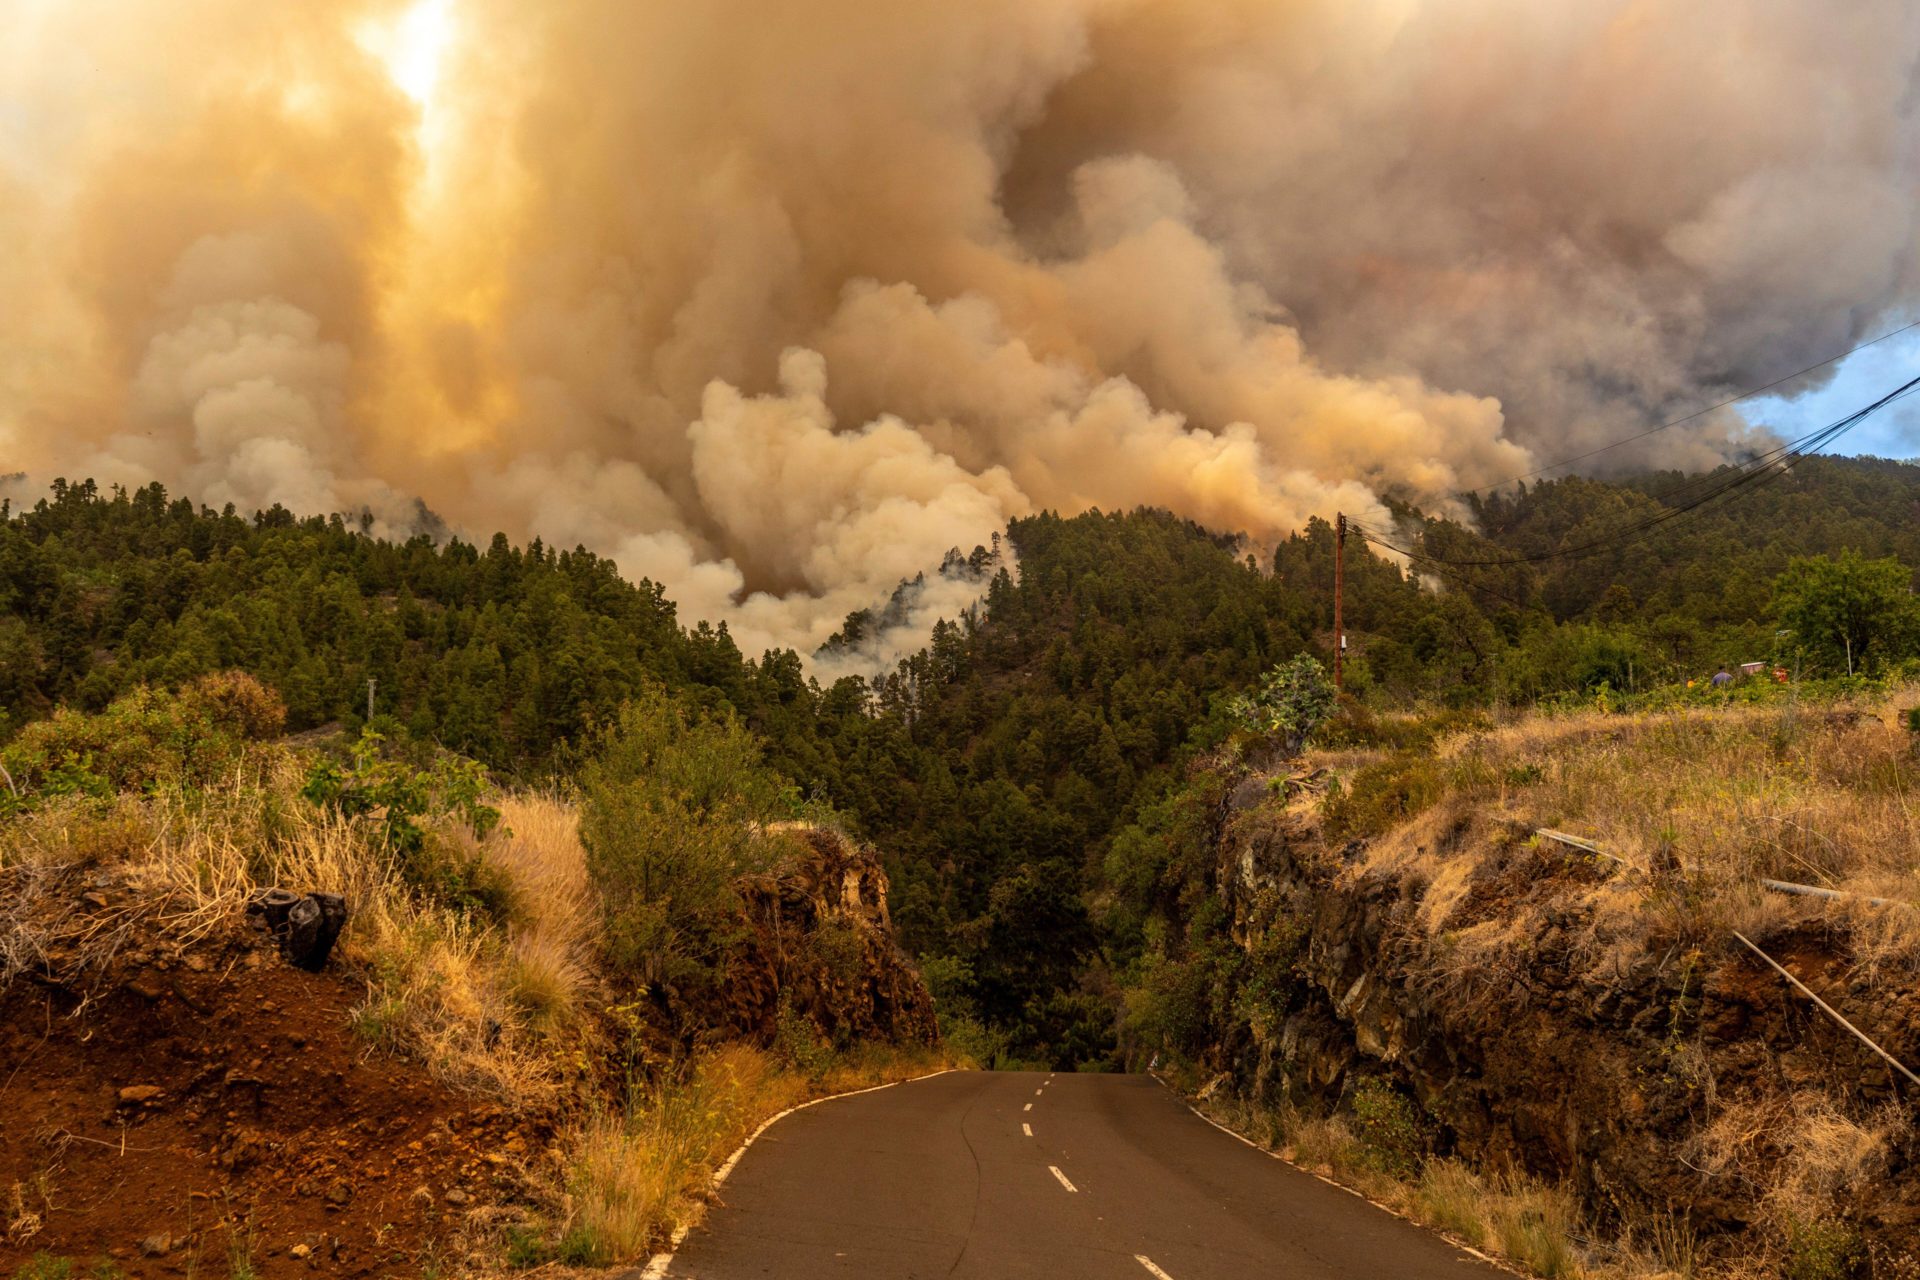 Smoke caused by the forest fire declared in La Palma